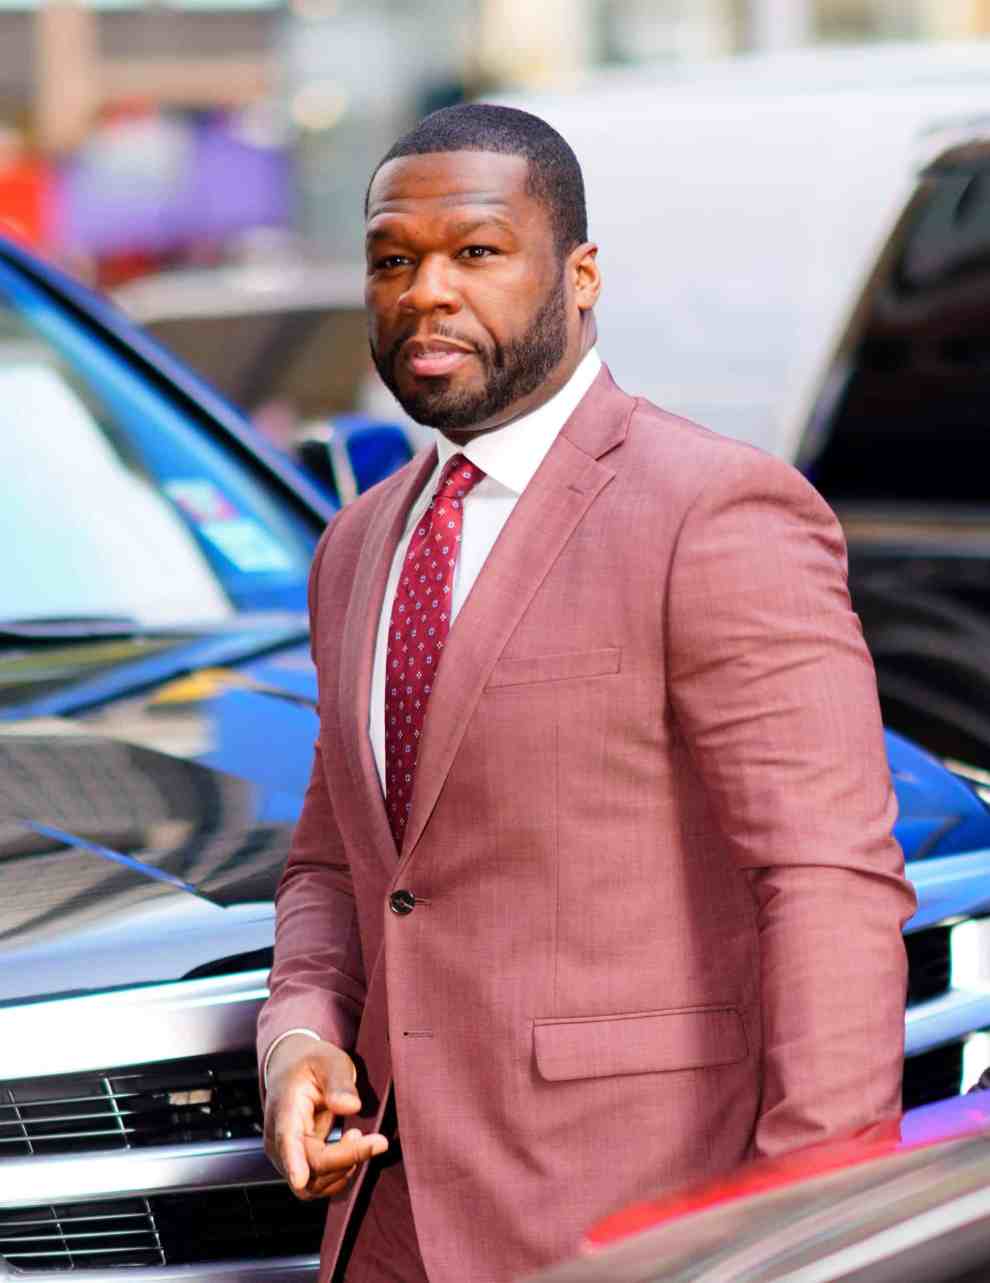 50 Cent wearing a red suit